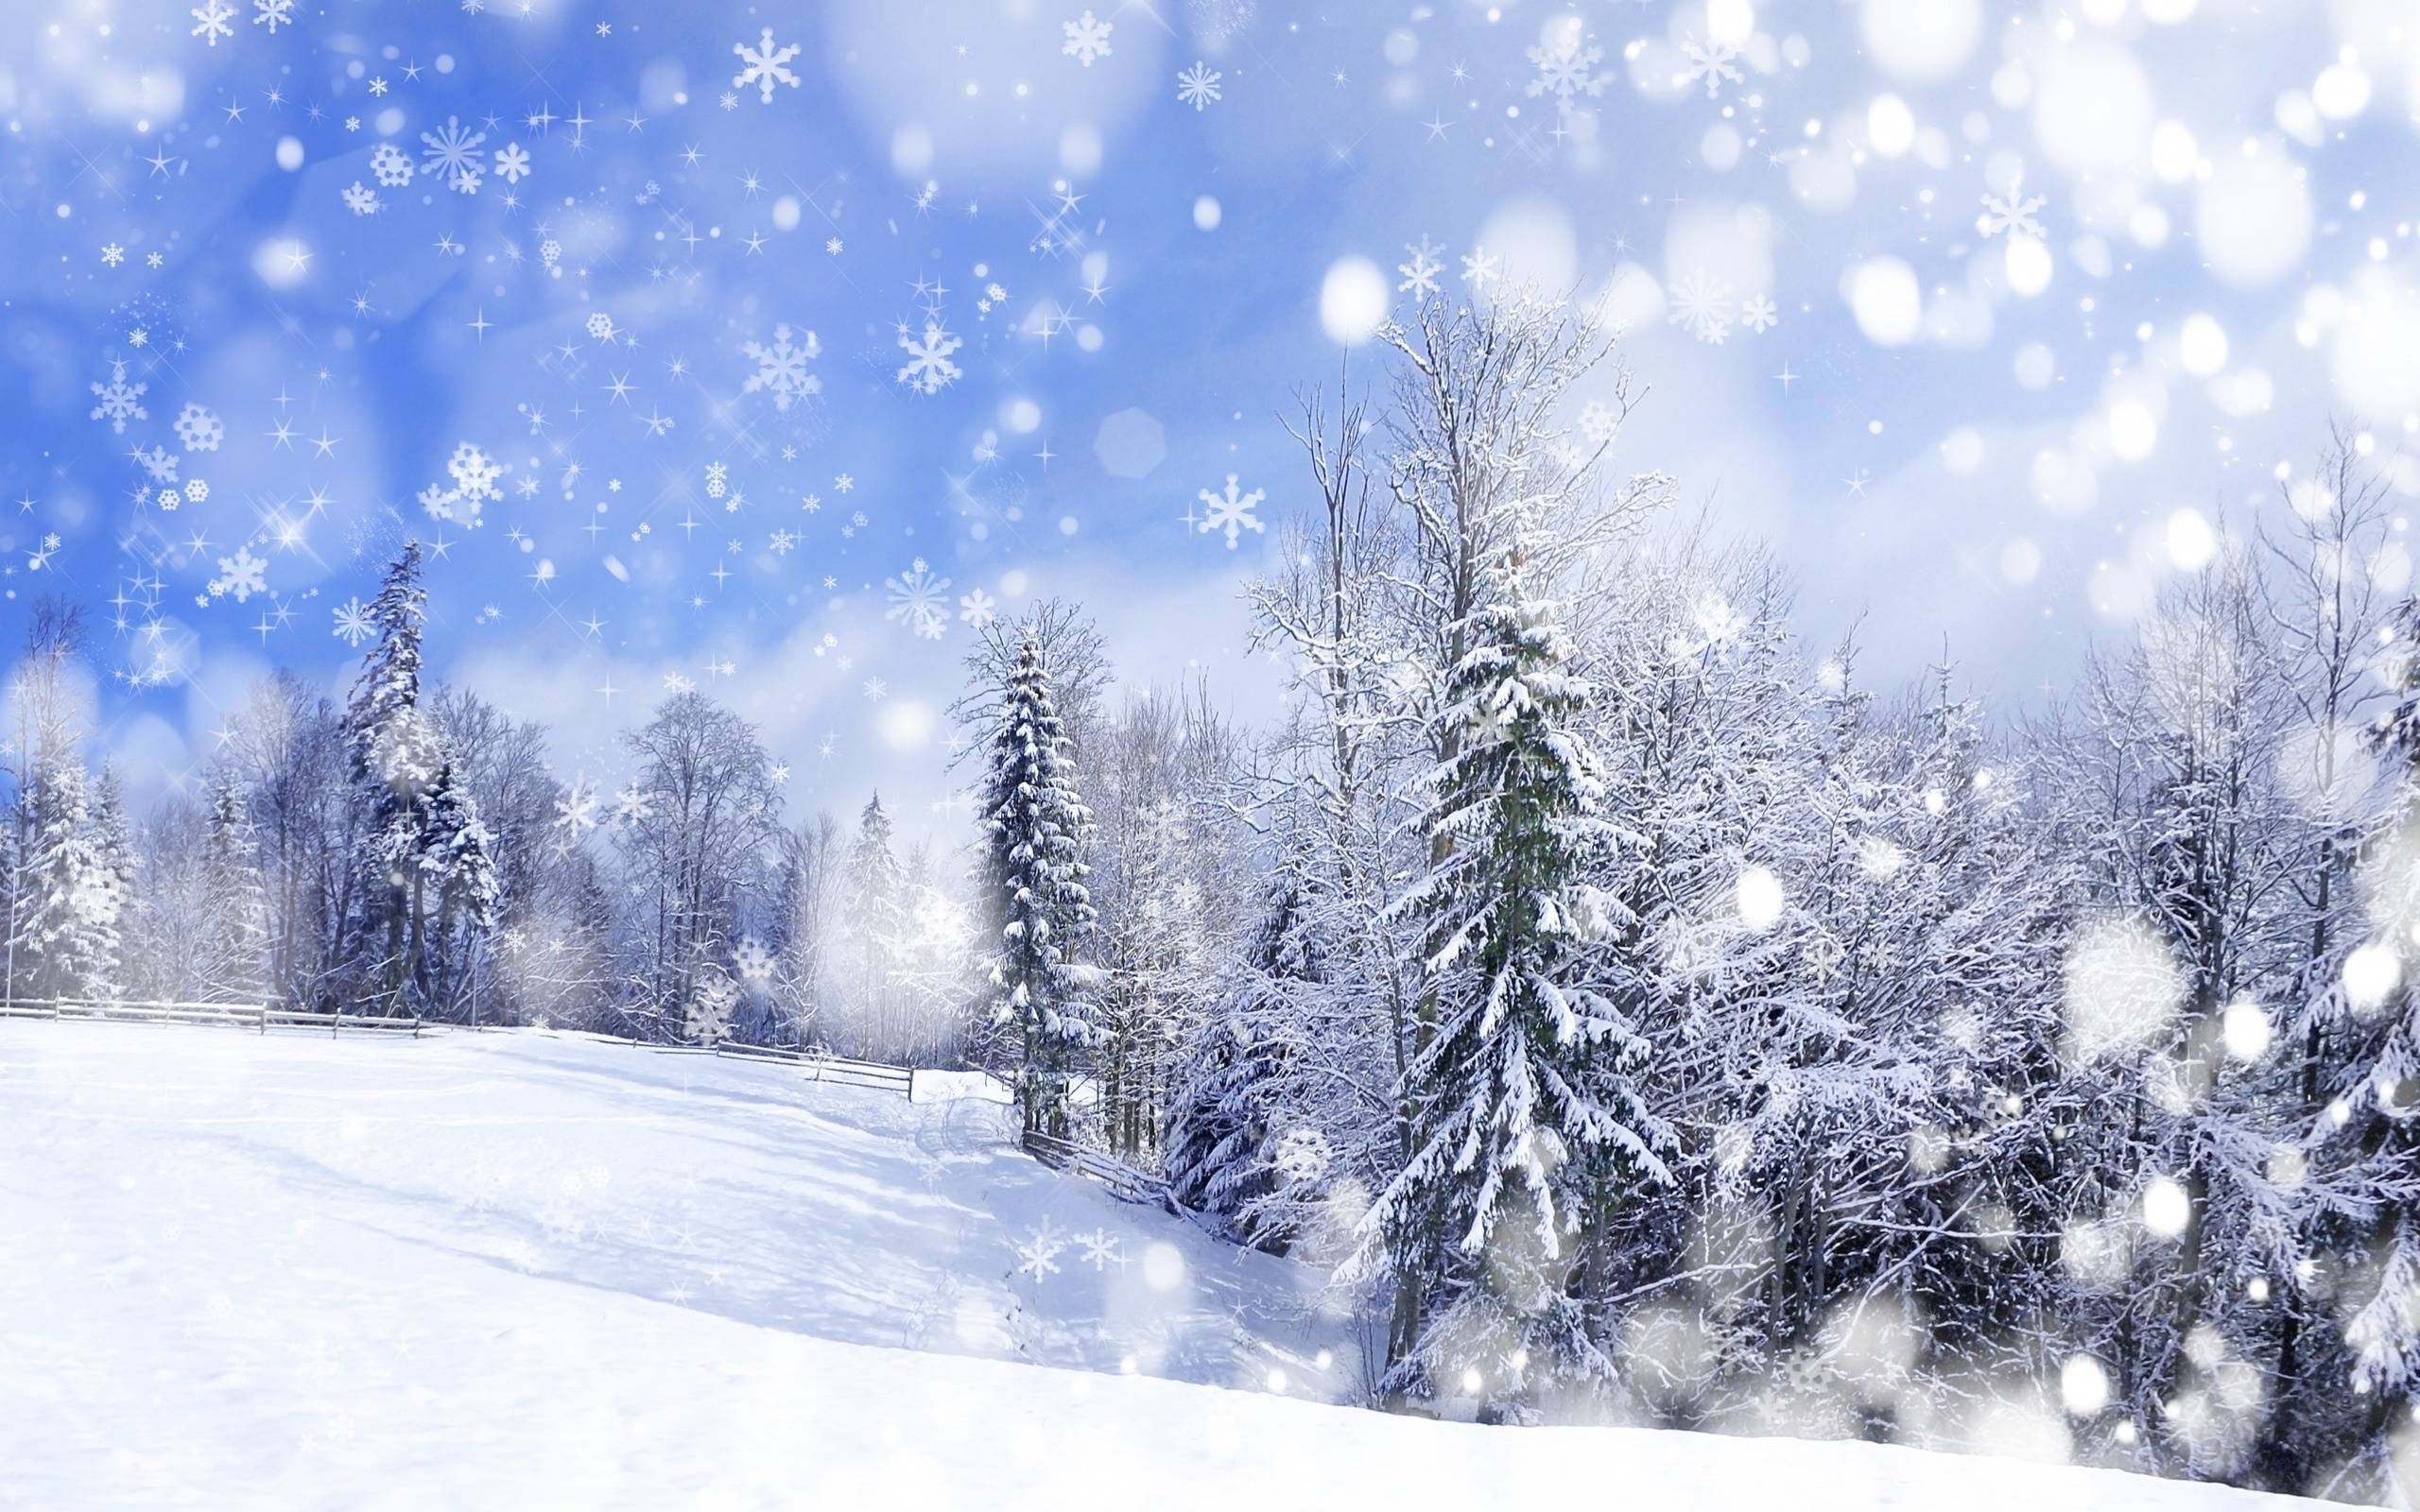 Animated Background Snow Stock Video Footage for Free Download